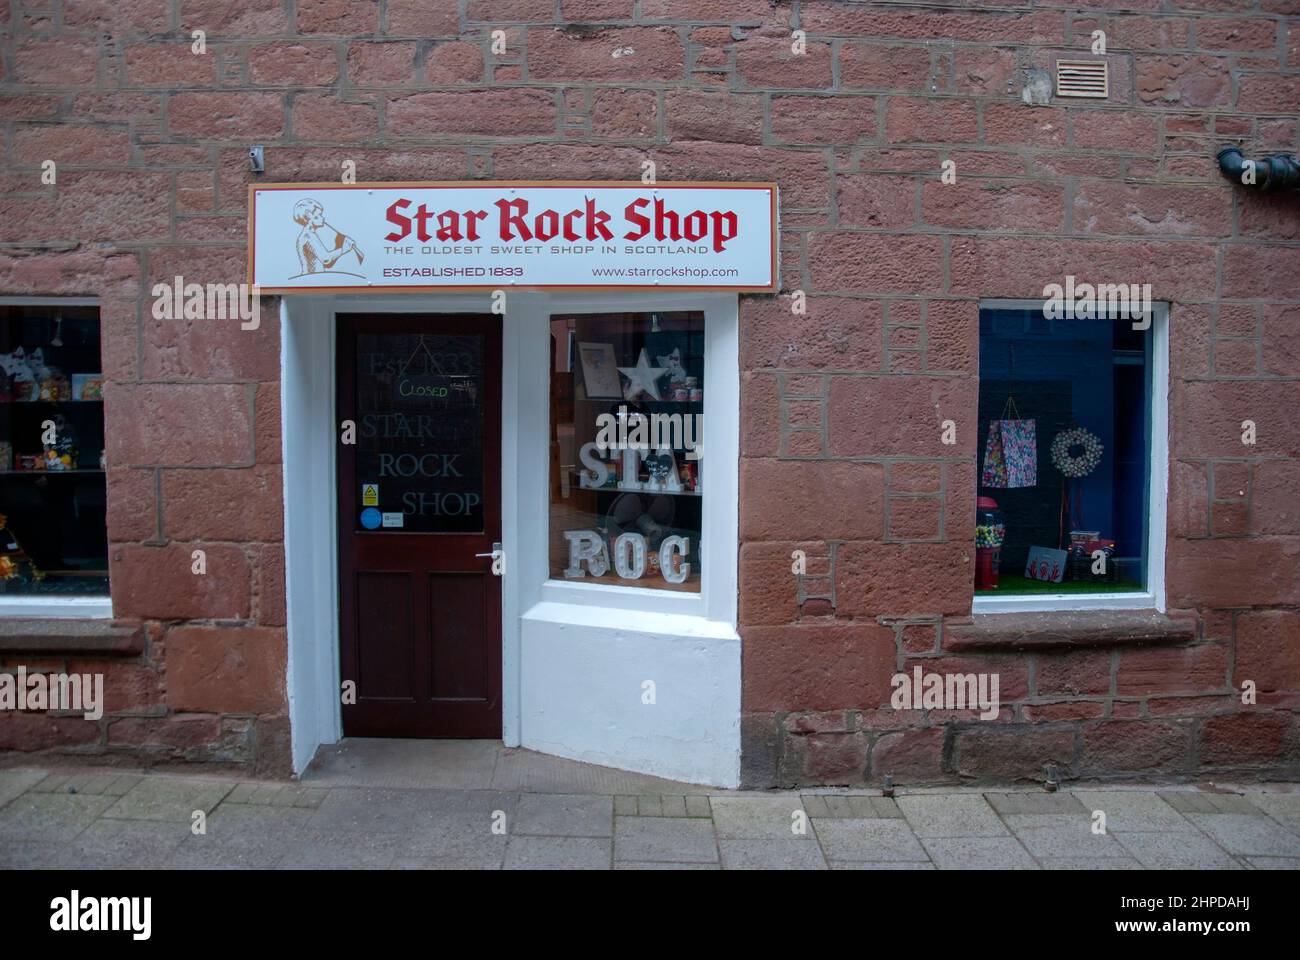 Star Rock Shop Oldest Sweet Shop in Scotland Roods Kirriemuir Angus Scotland United Kingdom exterior view 19th century red sandstone double fronted co Stock Photo